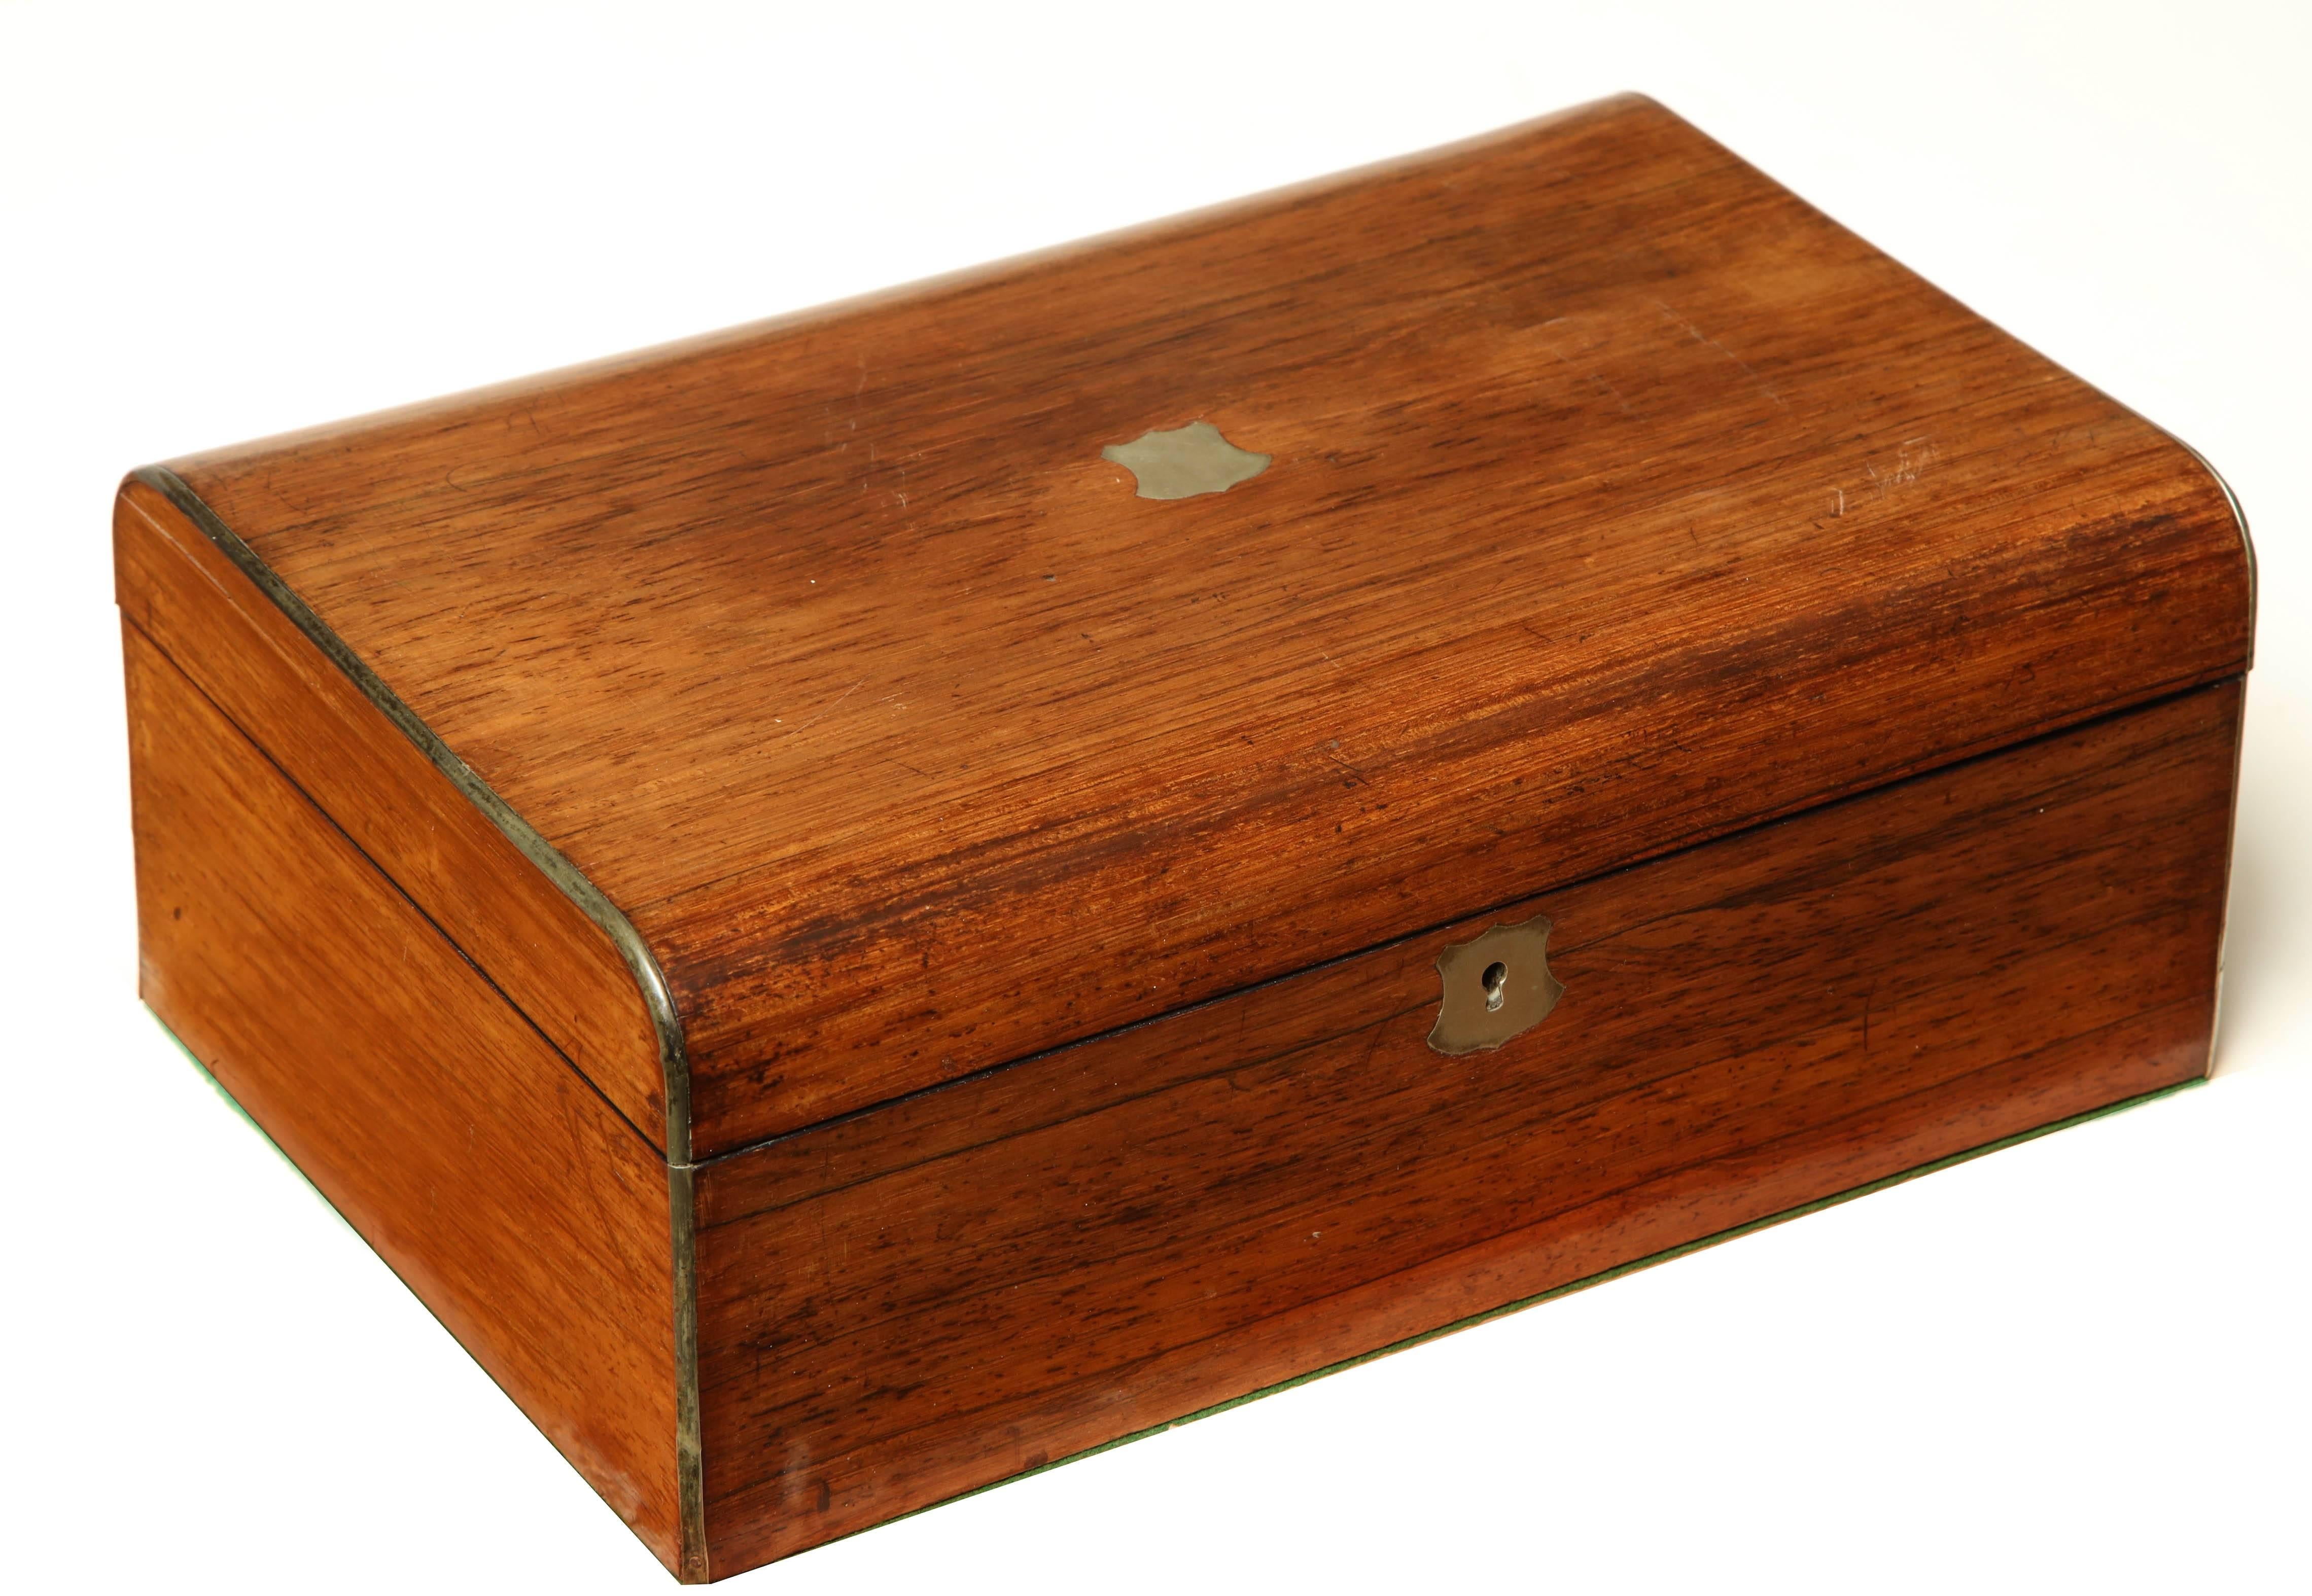 Mid-19th century English box with fitment and metal edges, circa 1860.